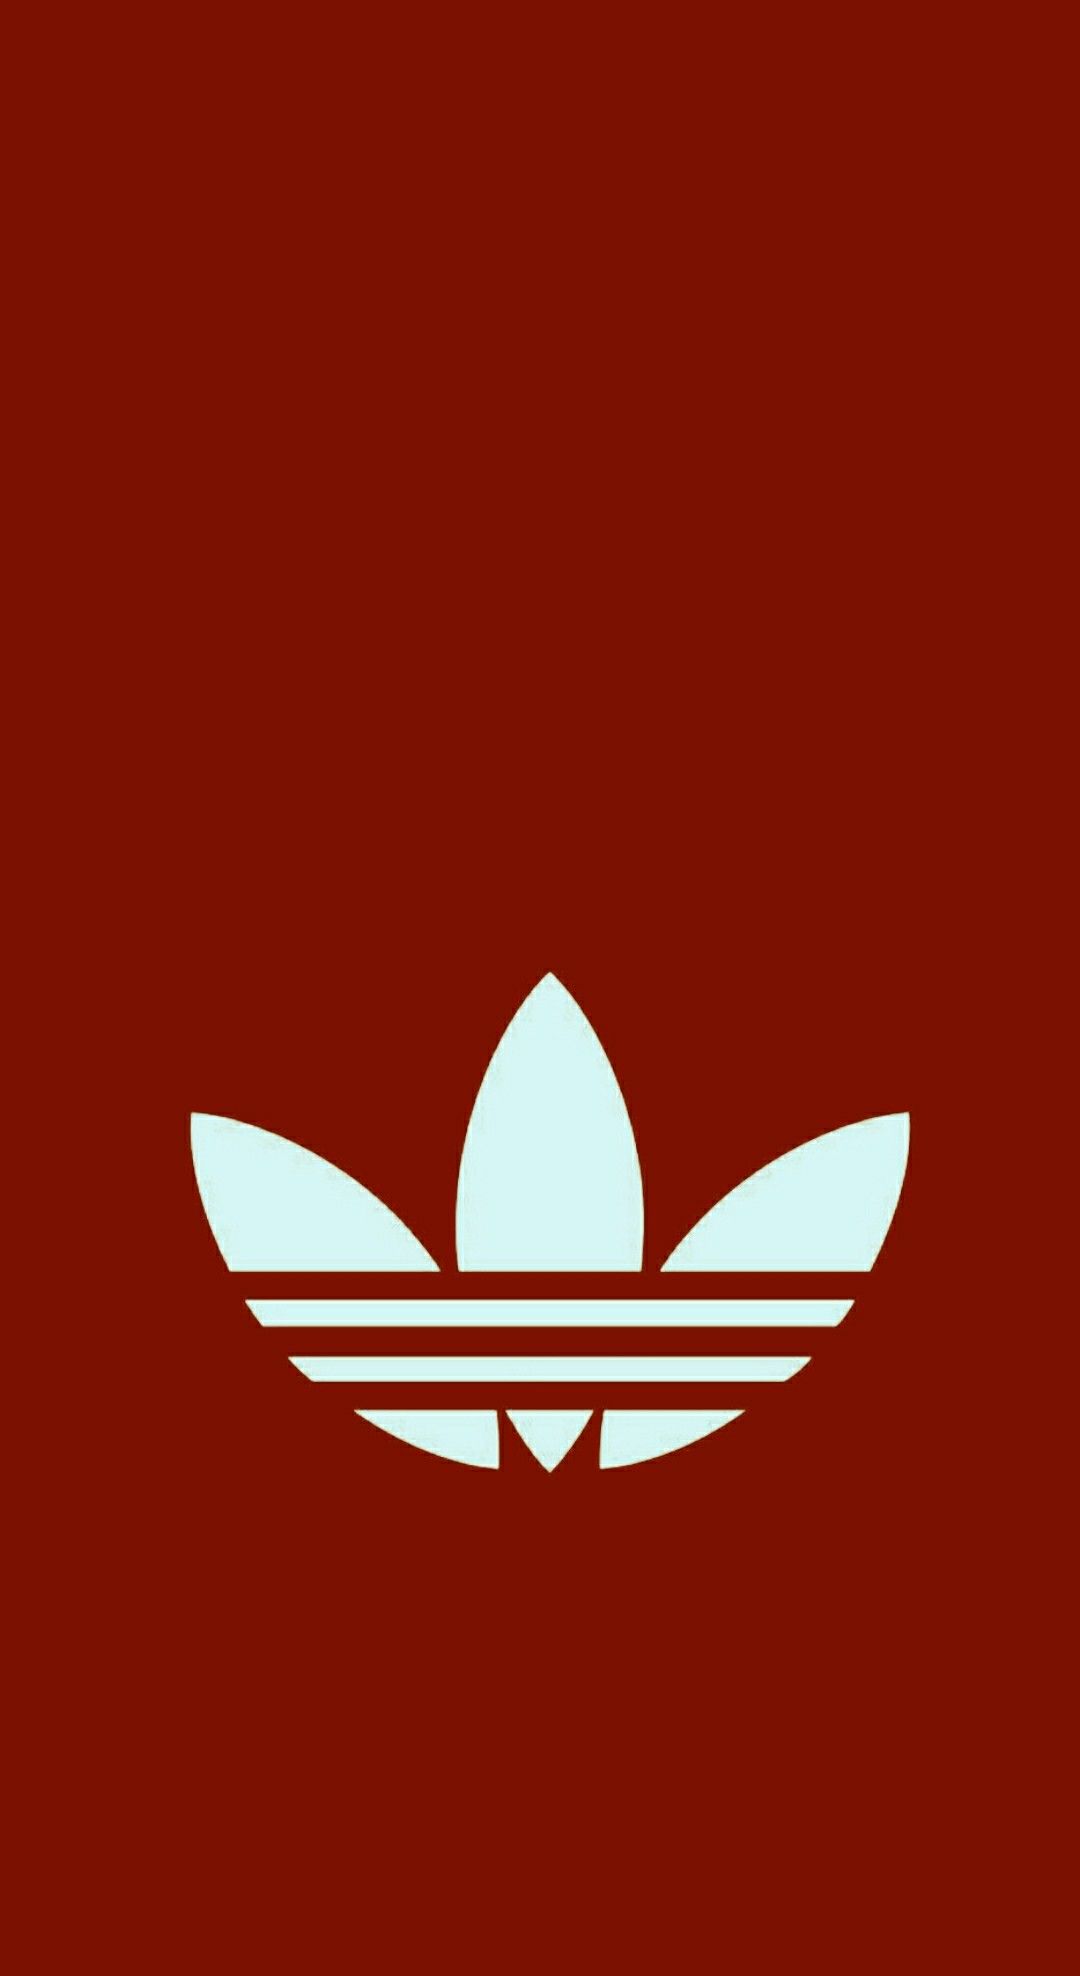 red adidas background